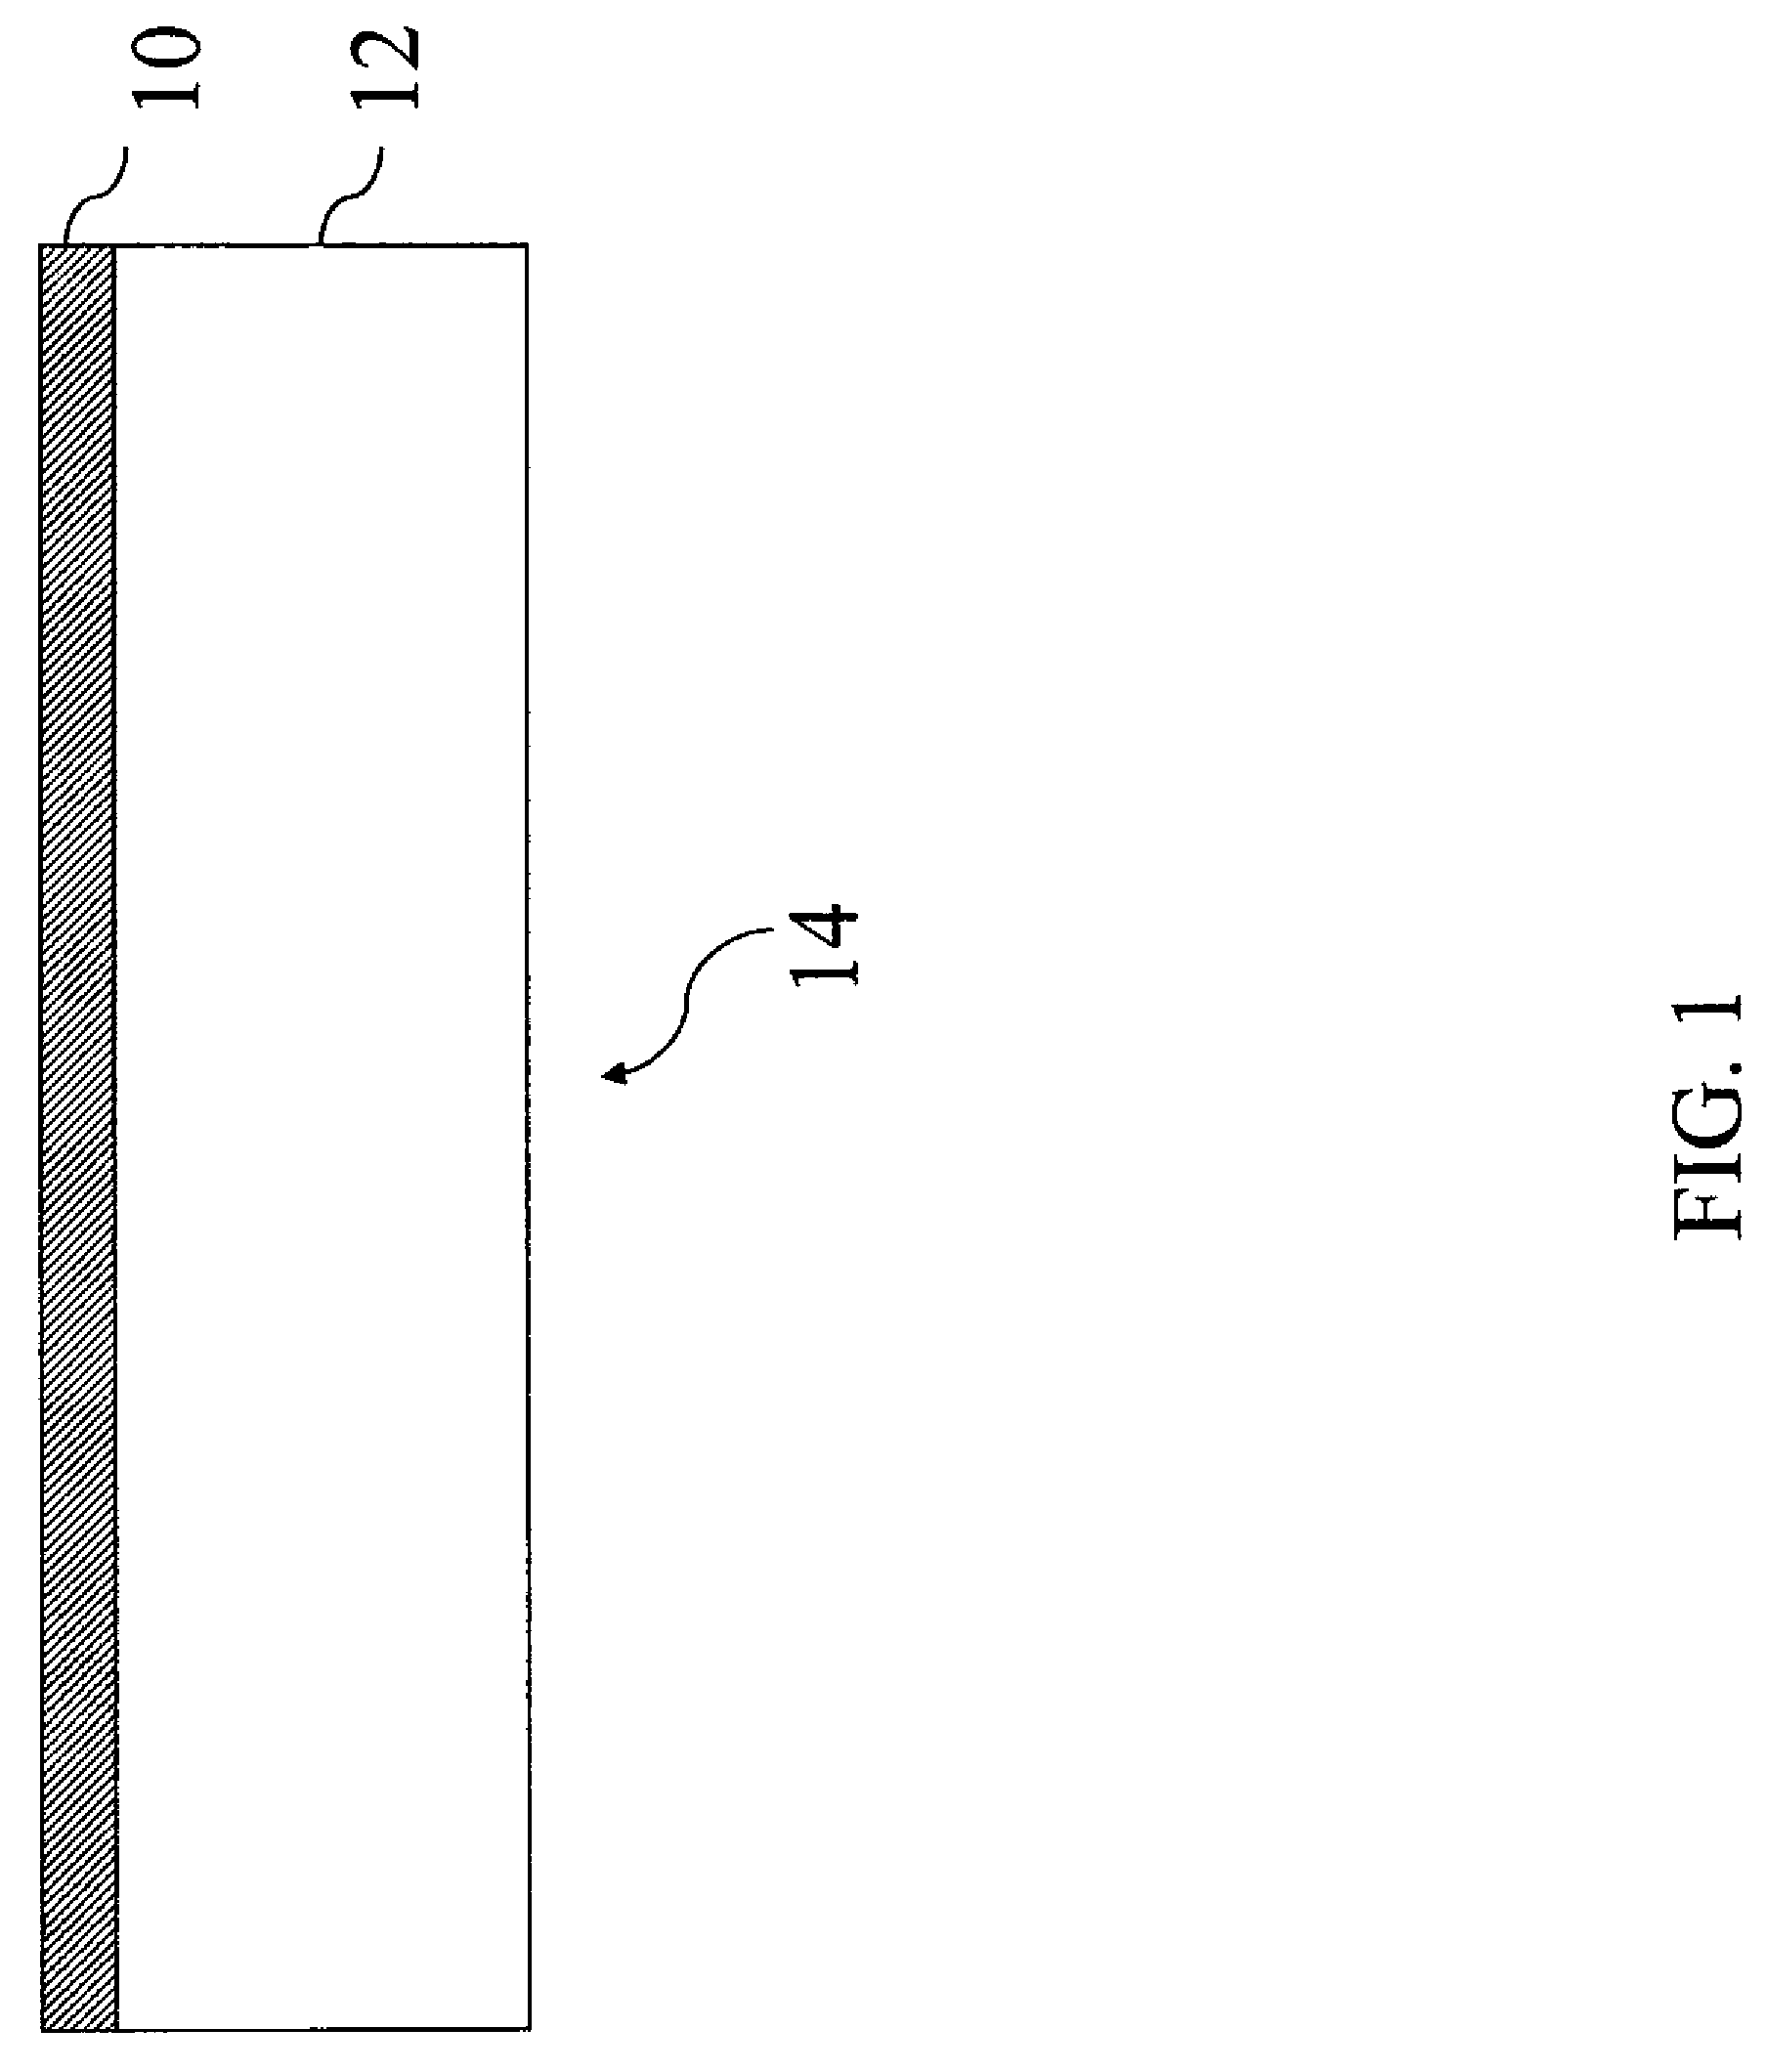 Polymeric conductive donor and transfer method